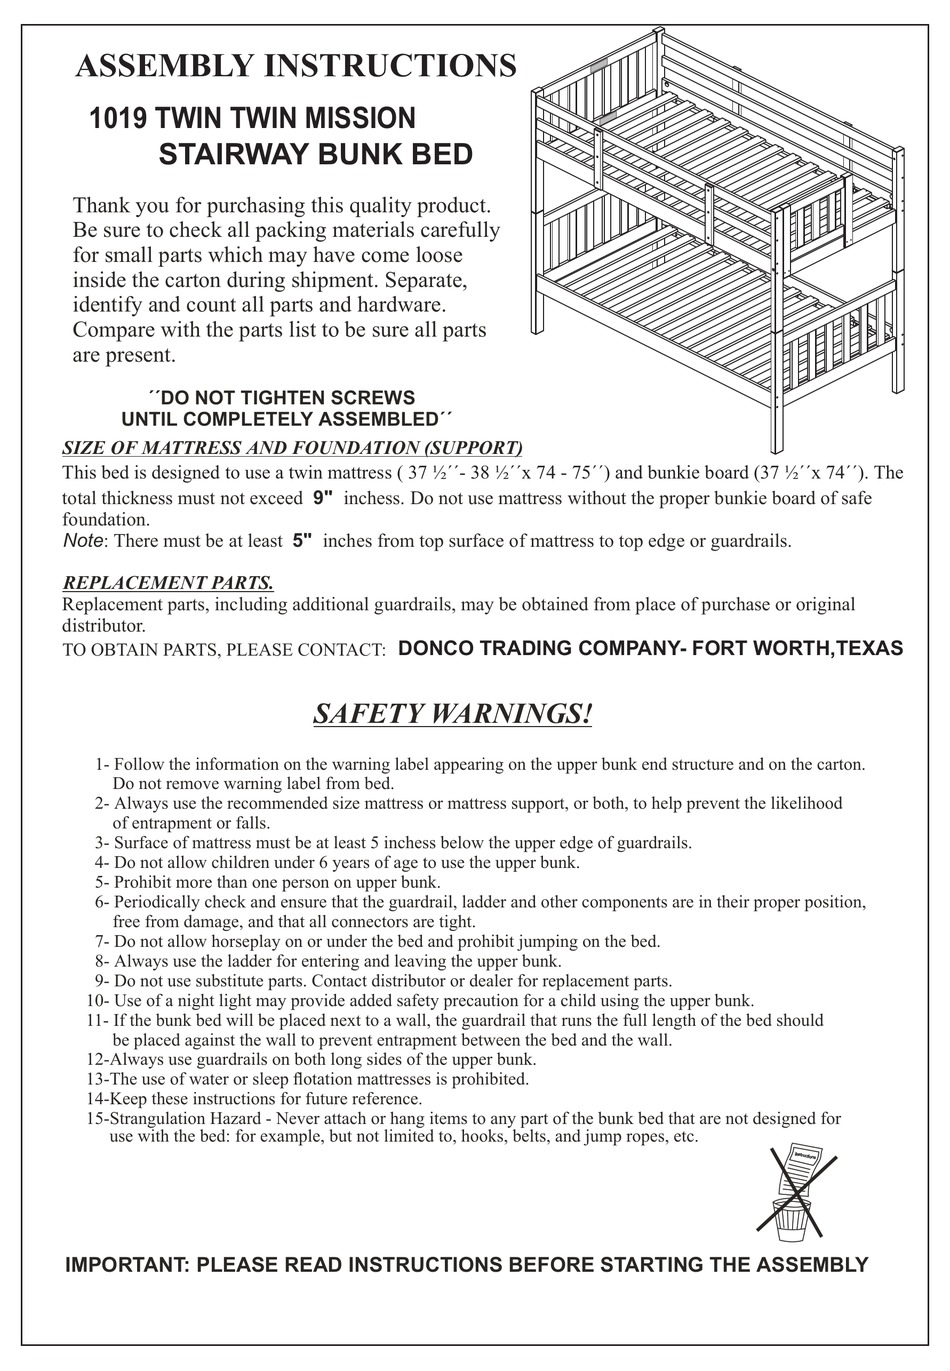 Donco 1019 Assembly Instructions Manual, Donco Bunk Bed Replacement Parts